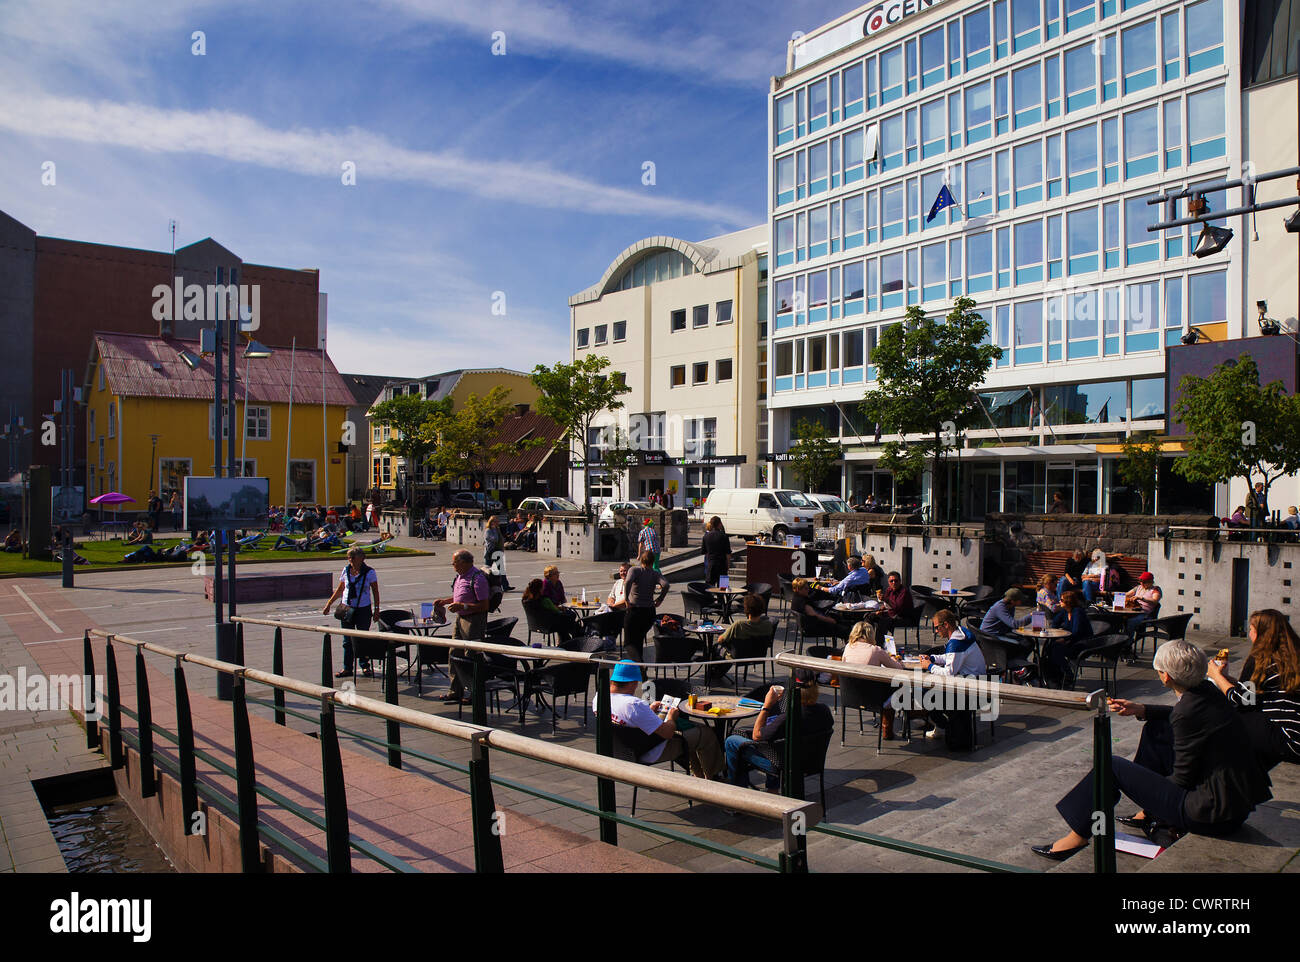 Ingólfstorg square, Reykjavik, Iceland, where geothermal energy is released through billowing steam vents Stock Photo